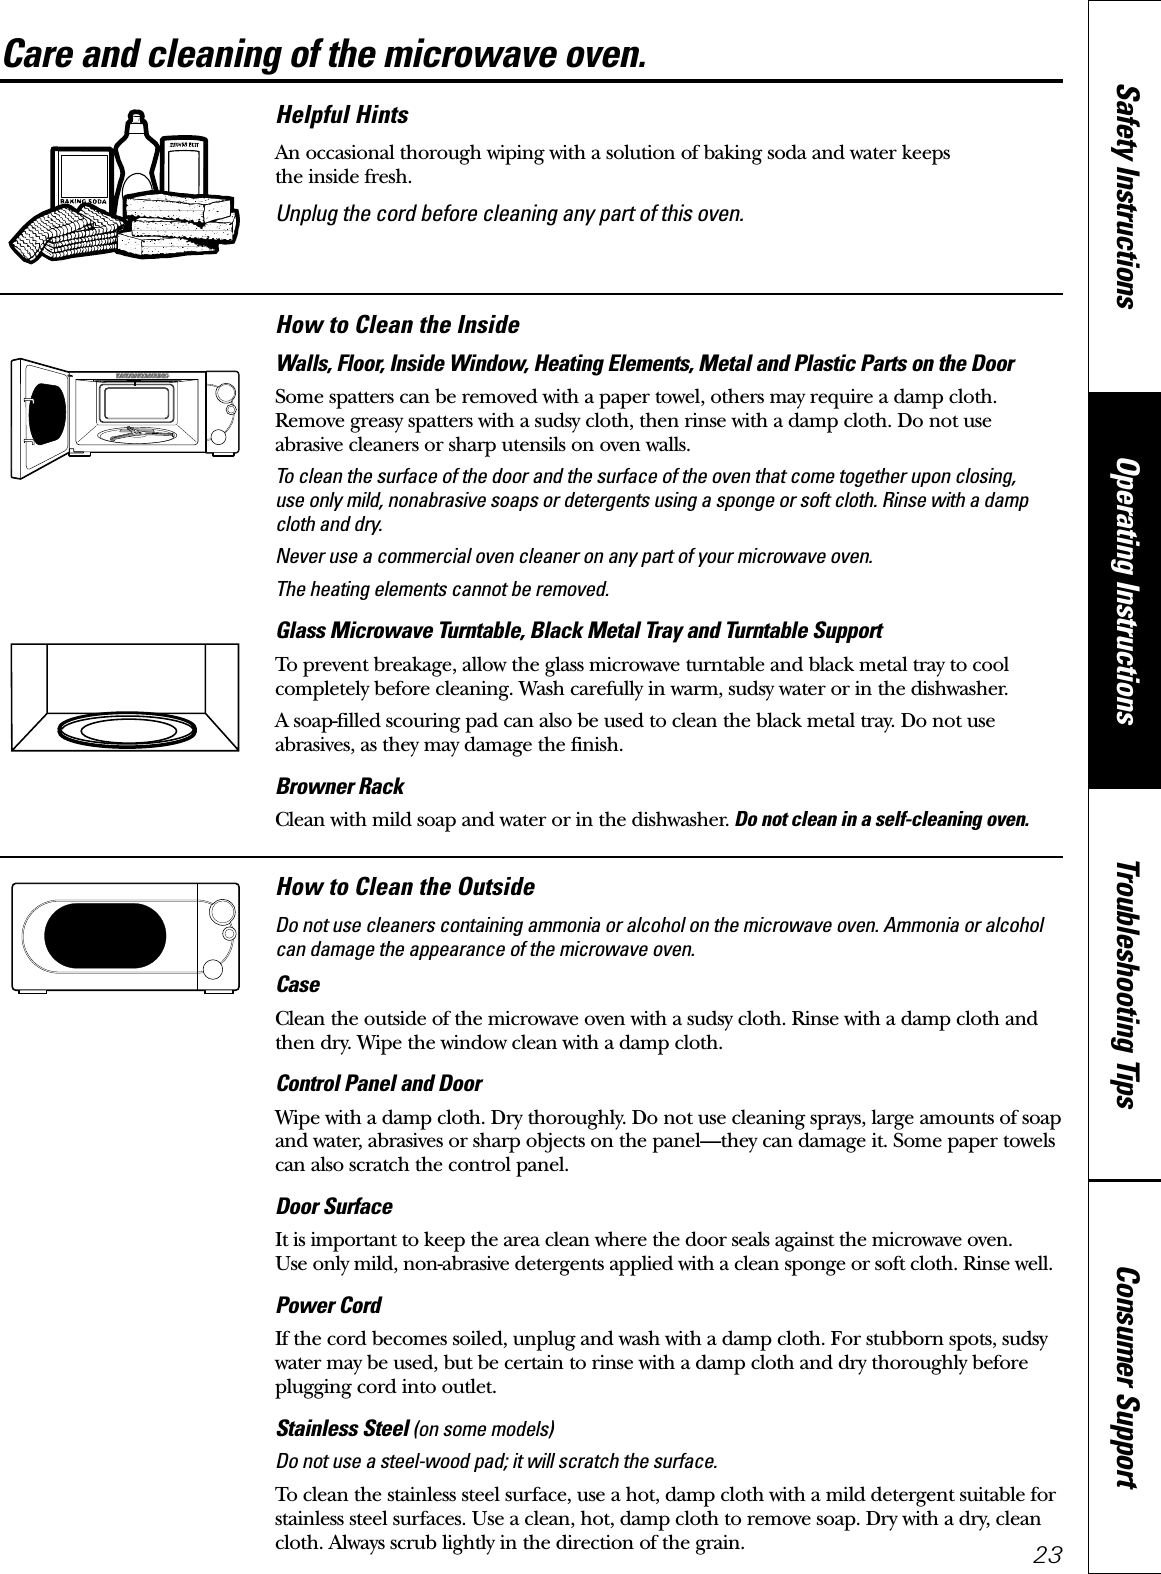 Consumer SupportTroubleshooting TipsOperating InstructionsSafety Instructions23Care and cleaning of the microwave oven. Helpful HintsAn occasional thorough wiping with a solution of baking soda and water keeps the inside fresh.Unplug the cord before cleaning any part of this oven.How to Clean the InsideWalls, Floor, Inside Window, Heating Elements, Metal and Plastic Parts on the DoorSome spatters can be removed with a paper towel, others may require a damp cloth.Remove greasy spatters with a sudsy cloth, then rinse with a damp cloth. Do not use abrasive cleaners or sharp utensils on oven walls. To clean the surface of the door and the surface of the oven that come together upon closing, use only mild, nonabrasive soaps or detergents using a sponge or soft cloth. Rinse with a dampcloth and dry.Never use a commercial oven cleaner on any part of your microwave oven.The heating elements cannot be removed.Glass Microwave Turntable, Black Metal Tray and Turntable Support To prevent breakage, allow the glass microwave turntable and black metal tray to coolcompletely before cleaning. Wash carefully in warm, sudsy water or in the dishwasher.A soap-filled scouring pad can also be used to clean the black metal tray. Do not useabrasives, as they may damage the finish.Browner RackClean with mild soap and water or in the dishwasher. Do not clean in a self-cleaning oven.How to Clean the OutsideDo not use cleaners containing ammonia or alcohol on the microwave oven. Ammonia or alcoholcan damage the appearance of the microwave oven.CaseClean the outside of the microwave oven with a sudsy cloth. Rinse with a damp cloth andthen dry. Wipe the window clean with a damp cloth. Control Panel and DoorWipe with a damp cloth. Dry thoroughly. Do not use cleaning sprays, large amounts of soapand water, abrasives or sharp objects on the panel—they can damage it. Some paper towelscan also scratch the control panel.Door SurfaceIt is important to keep the area clean where the door seals against the microwave oven. Use only mild, non-abrasive detergents applied with a clean sponge or soft cloth. Rinse well.Power CordIf the cord becomes soiled, unplug and wash with a damp cloth. For stubborn spots, sudsywater may be used, but be certain to rinse with a damp cloth and dry thoroughly beforeplugging cord into outlet.Stainless Steel (on some models)Do not use a steel-wood pad; it will scratch the surface.To clean the stainless steel surface, use a hot, damp cloth with a mild detergent suitable forstainless steel surfaces. Use a clean, hot, damp cloth to remove soap. Dry with a dry, cleancloth. Always scrub lightly in the direction of the grain.